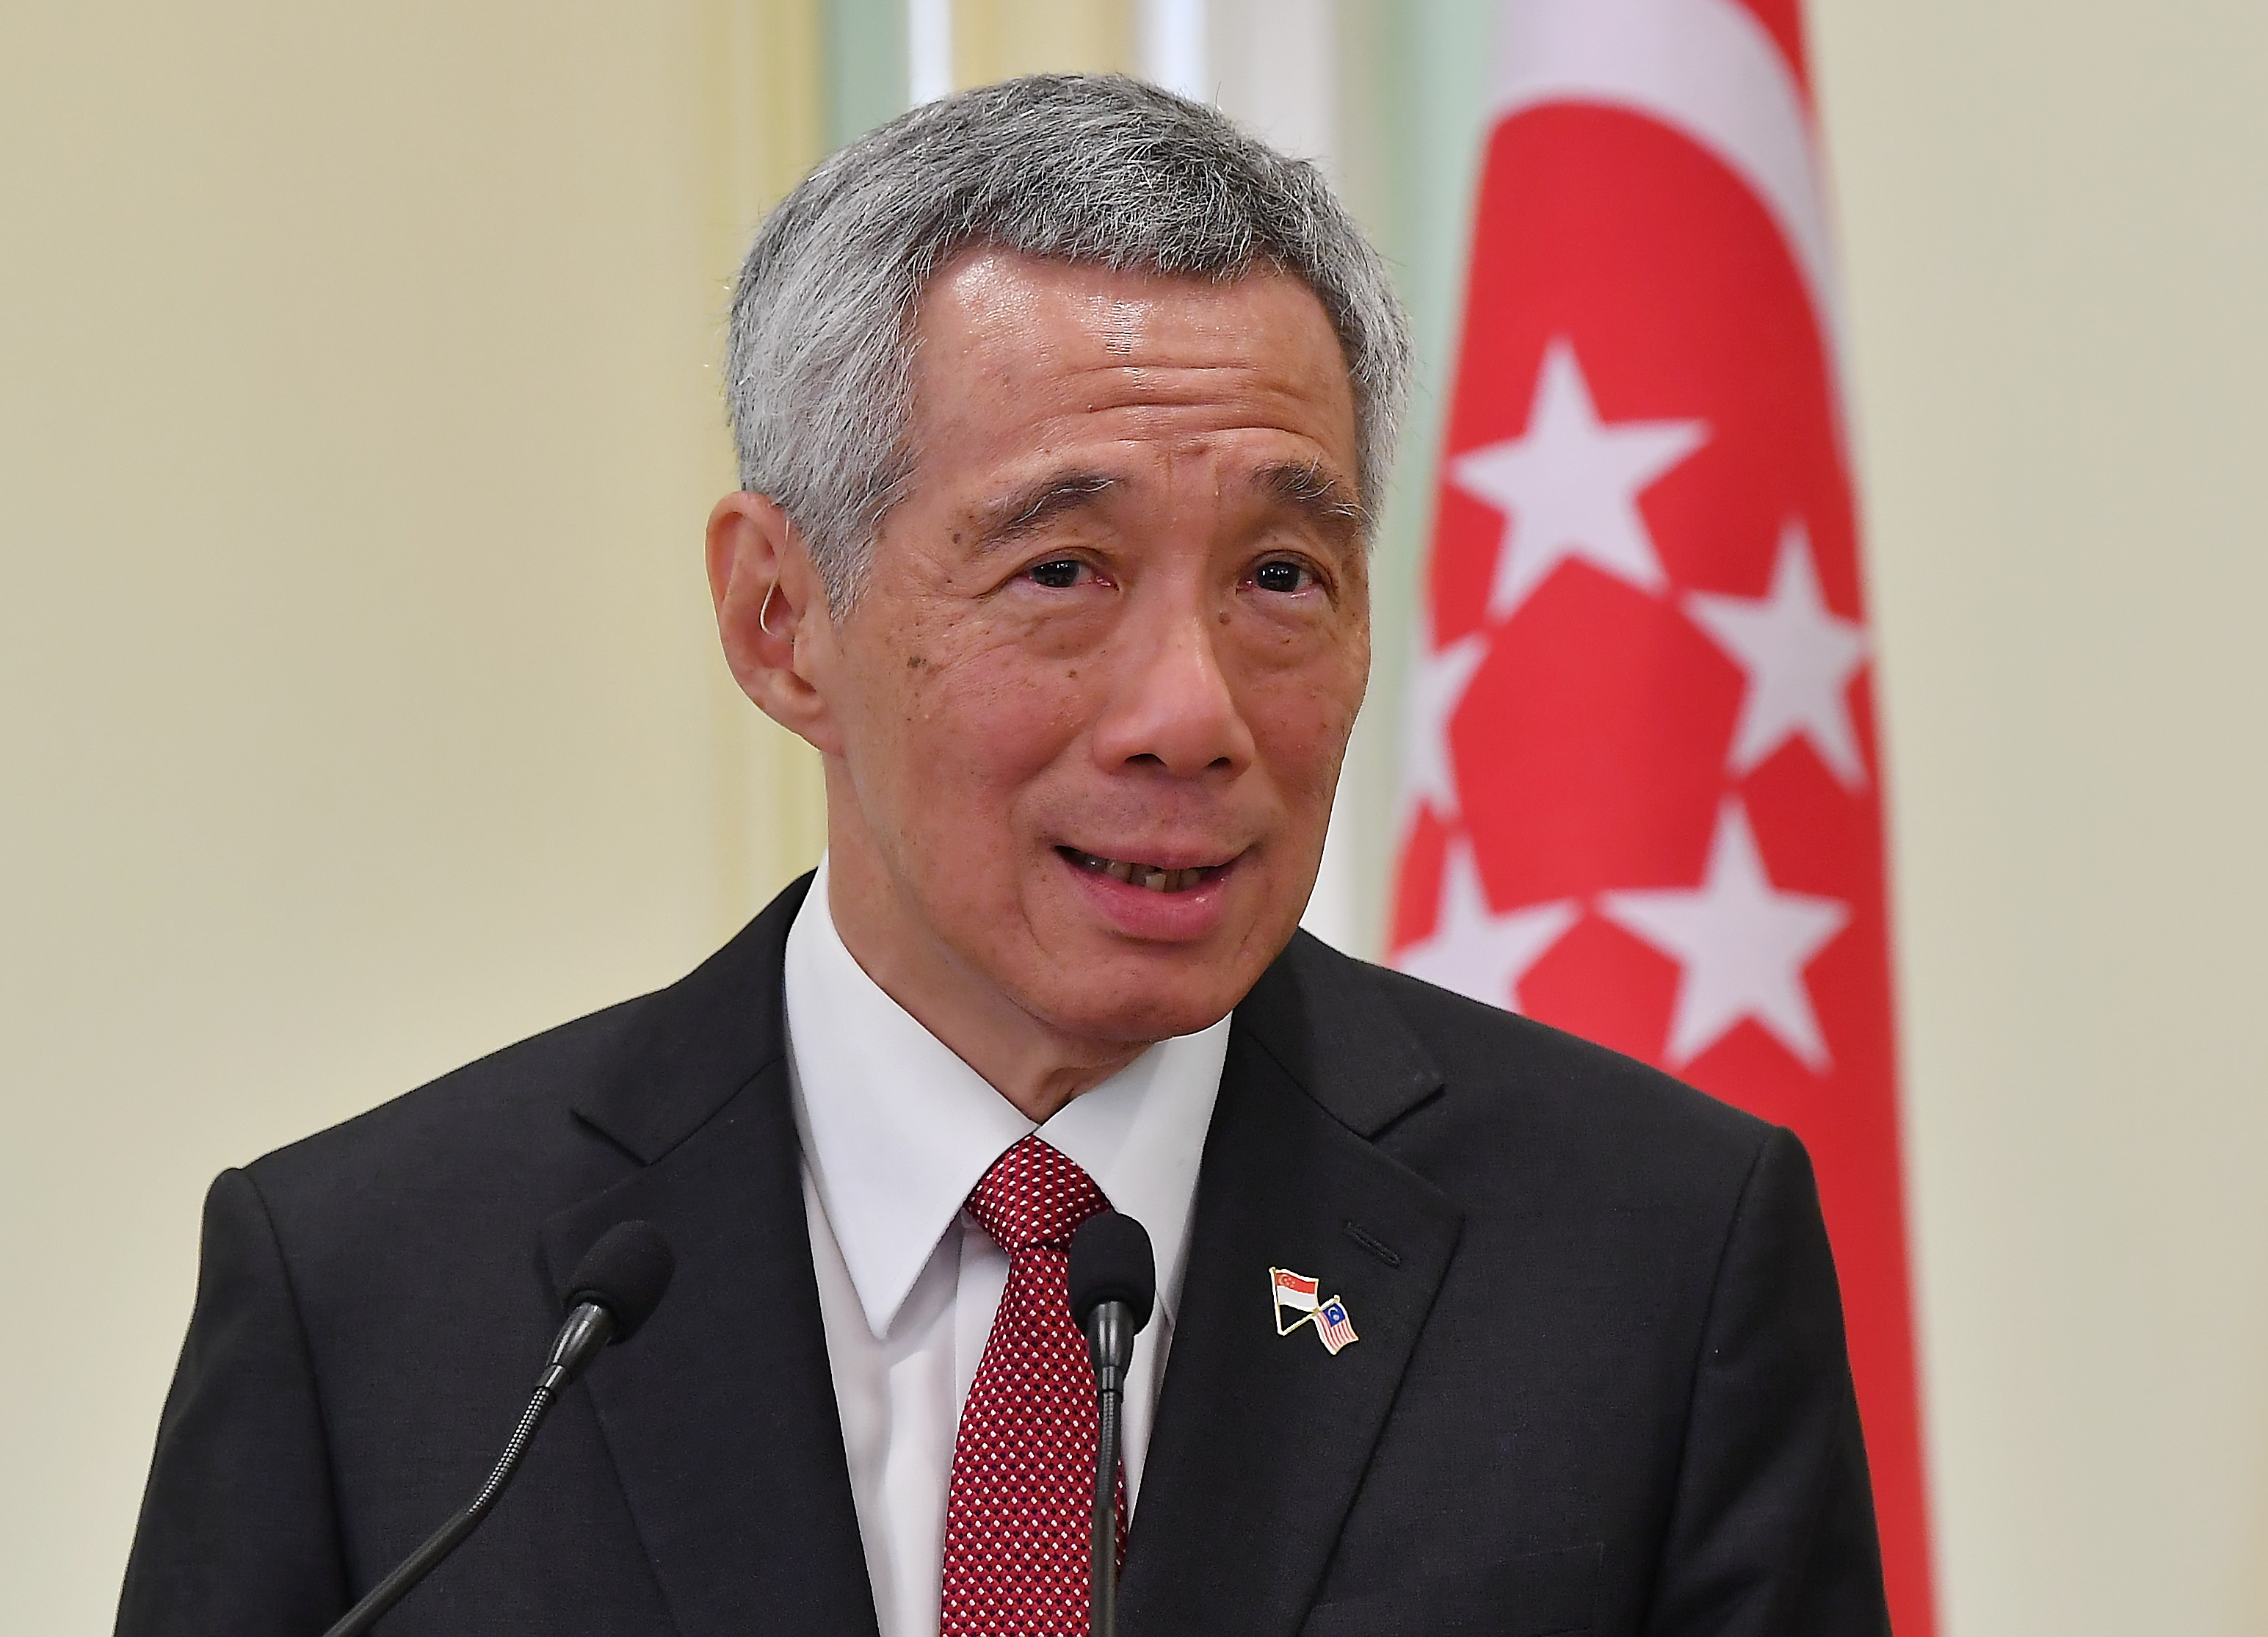 Easing the circuit breaker will be done cautiously, says Singapore PM